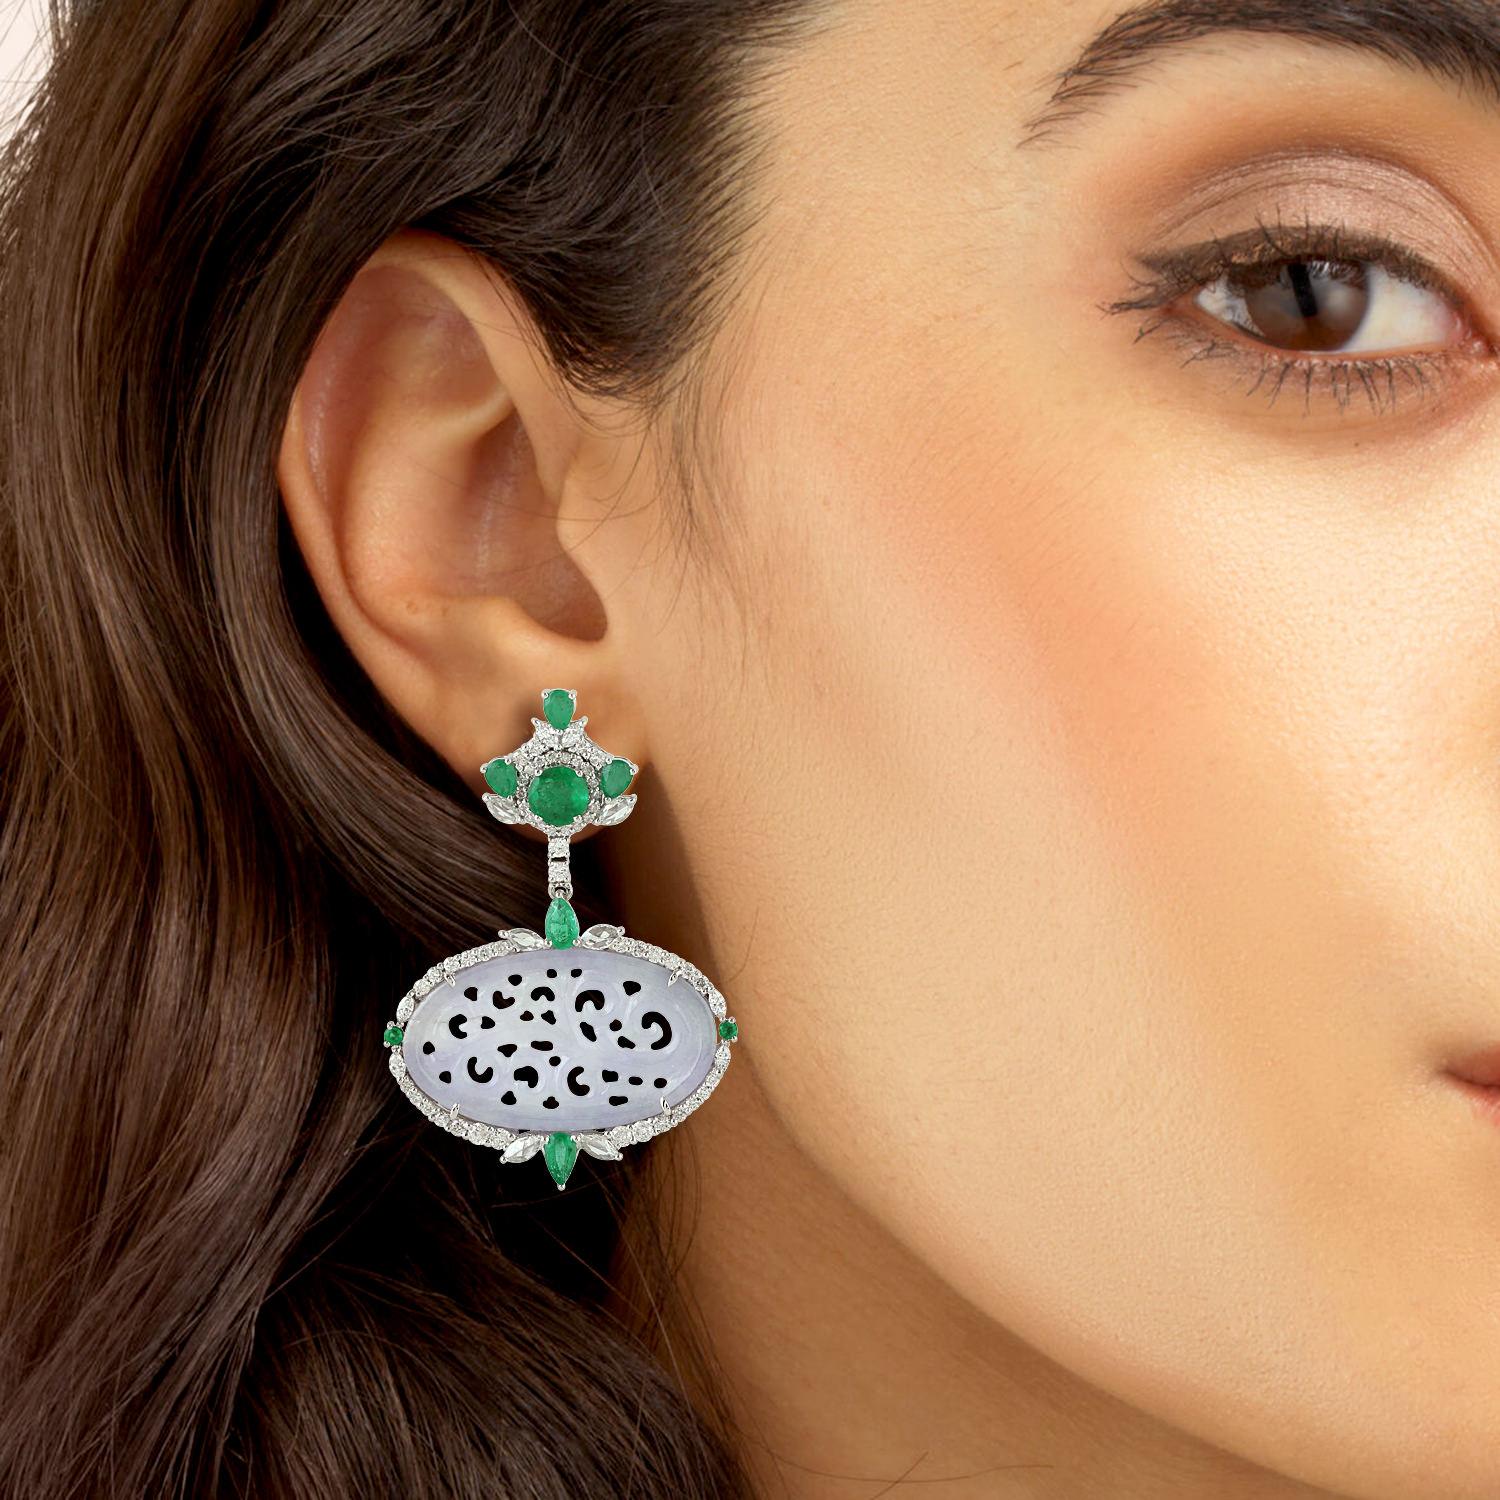 These stunning hand carved Jade earrings are crafted in 18-karat gold. It is set in 14.99 carats Jade, 3.03 carats emerald and 2.44 carats of sparkling diamonds.

FOLLOW  MEGHNA JEWELS storefront to view the latest collection & exclusive pieces. 